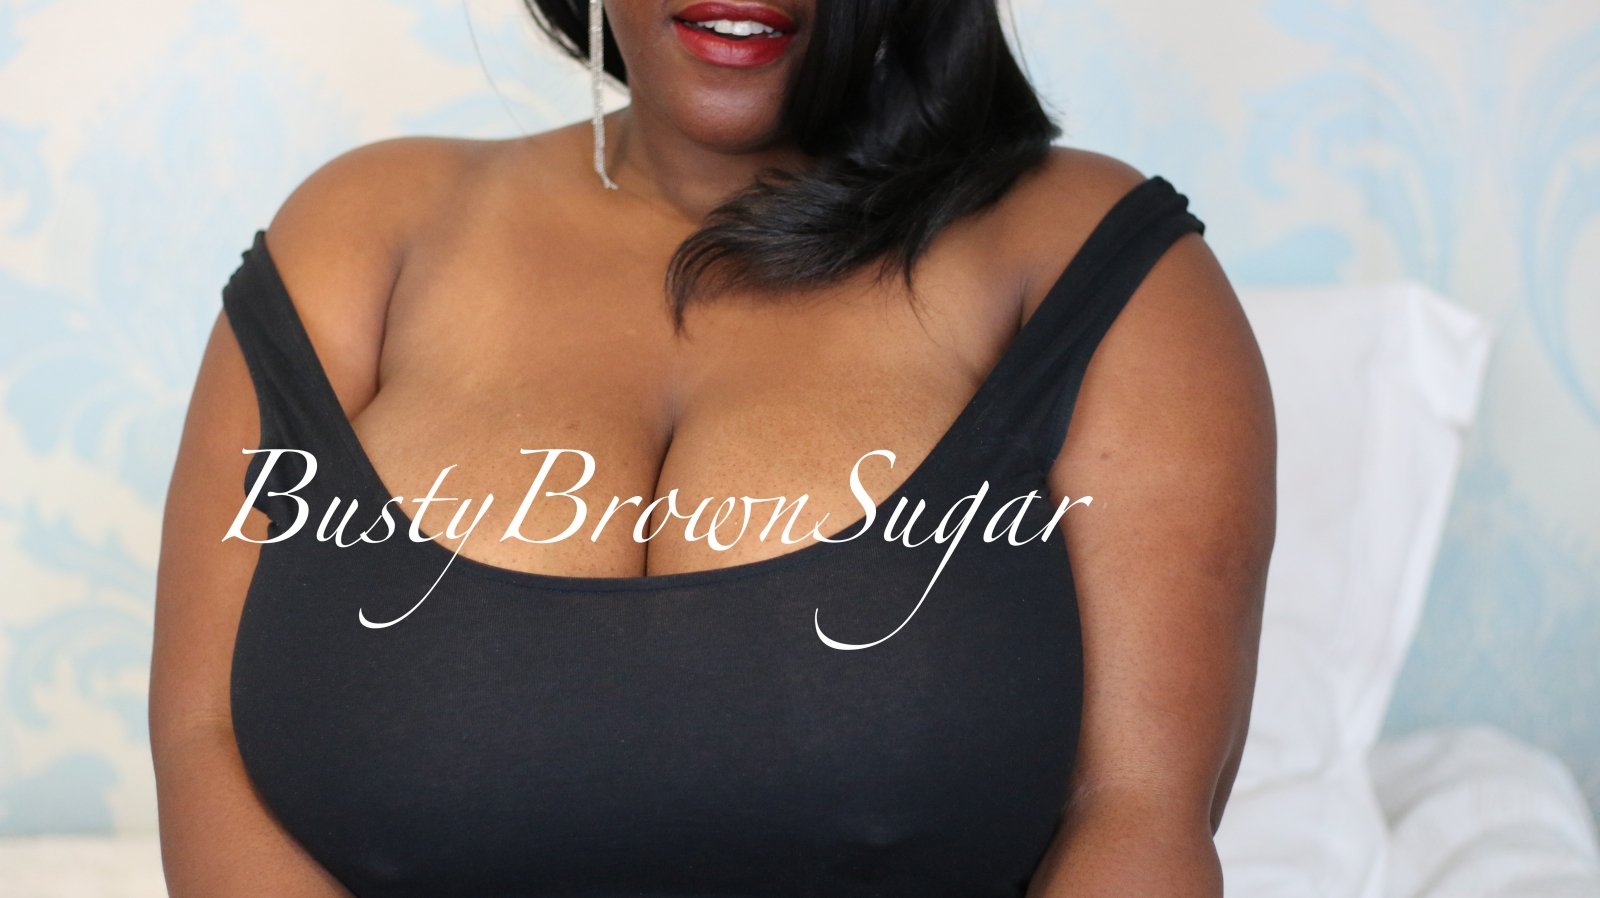 BustyBrownSugar images from live cam show